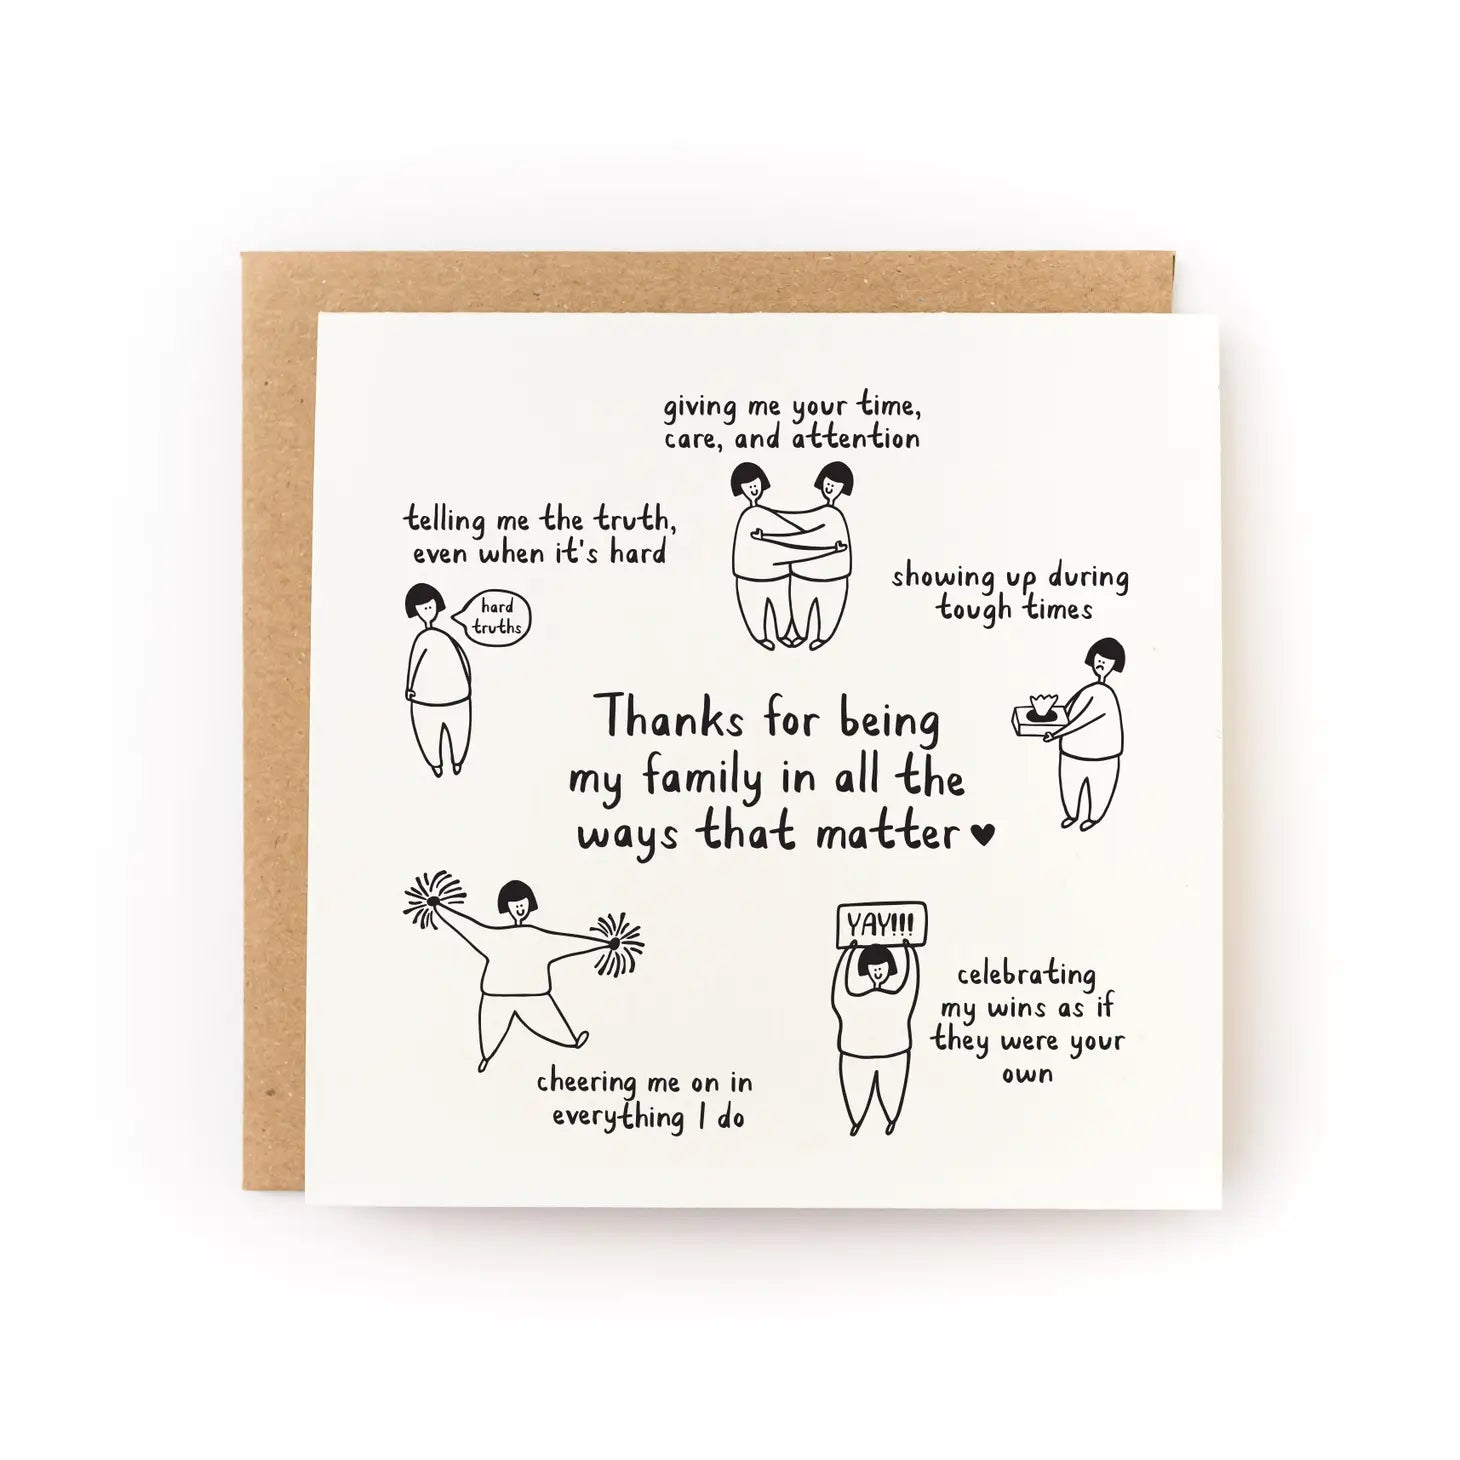 White card with five illustrations of people. Black text reads "thanks for being my family in all the ways that matter. Telling me the truth when it's hard. Giving me your time, care, and attention. Showing up during tough times. Celebrating my wins as if they were your own. Cheering me on in everything I do"